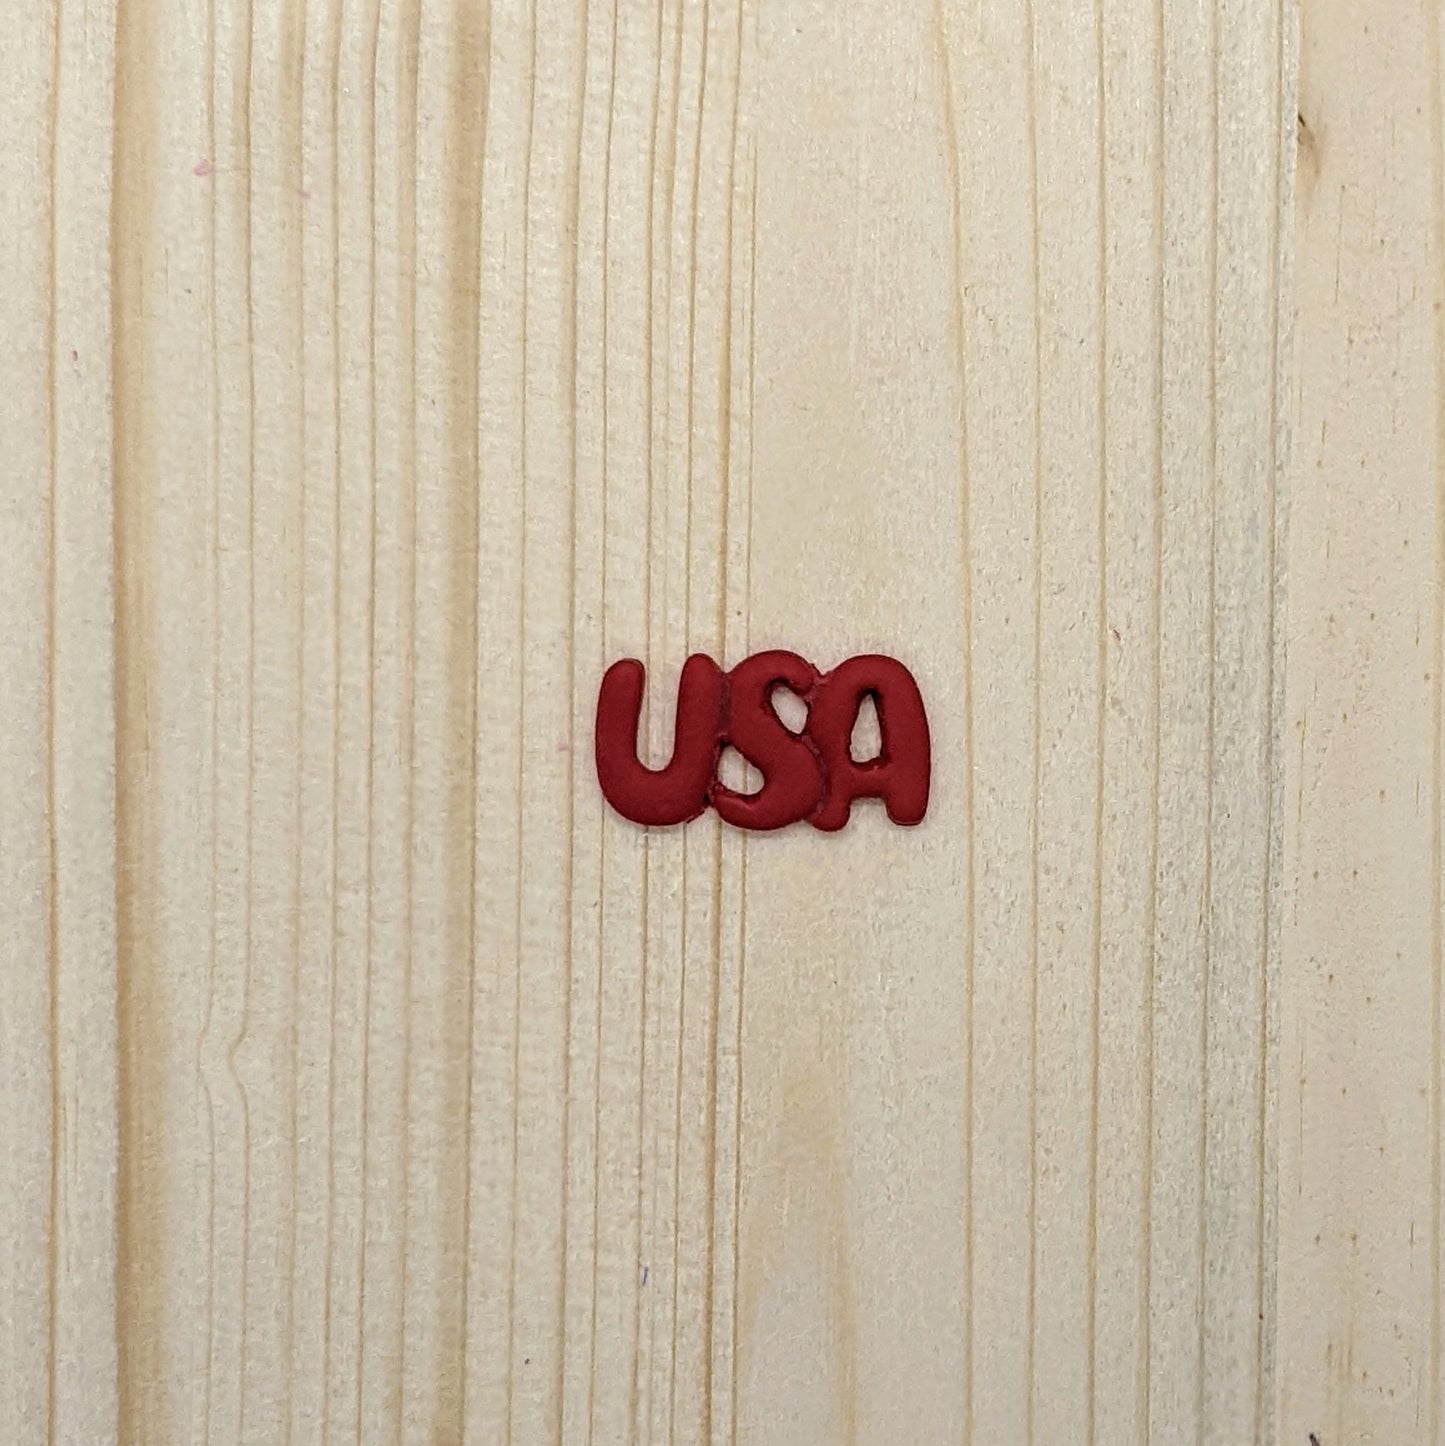 USA Bubble Letters Cookie Cutter for Cookies, Ceramics, Pottery, Polymer Clay, Fondant - Multi-Medium Craft & Baking Tool